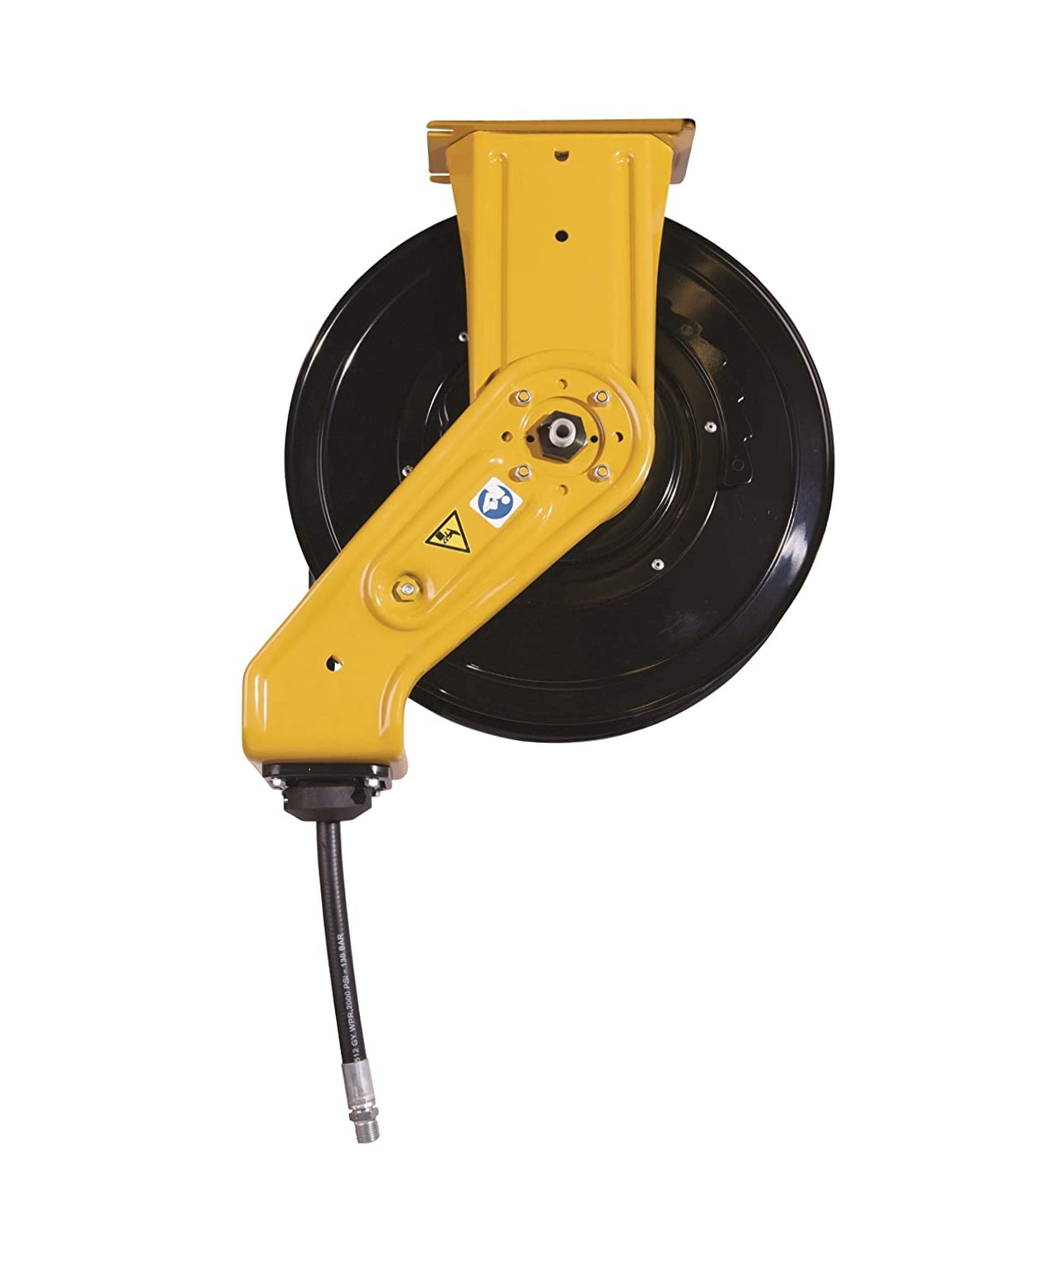 Graco SD20 Series Hose Reel w/ 1/2 in. X 50 ft. Hose - Air/Water - Yellow (Truck/Bench Mount)